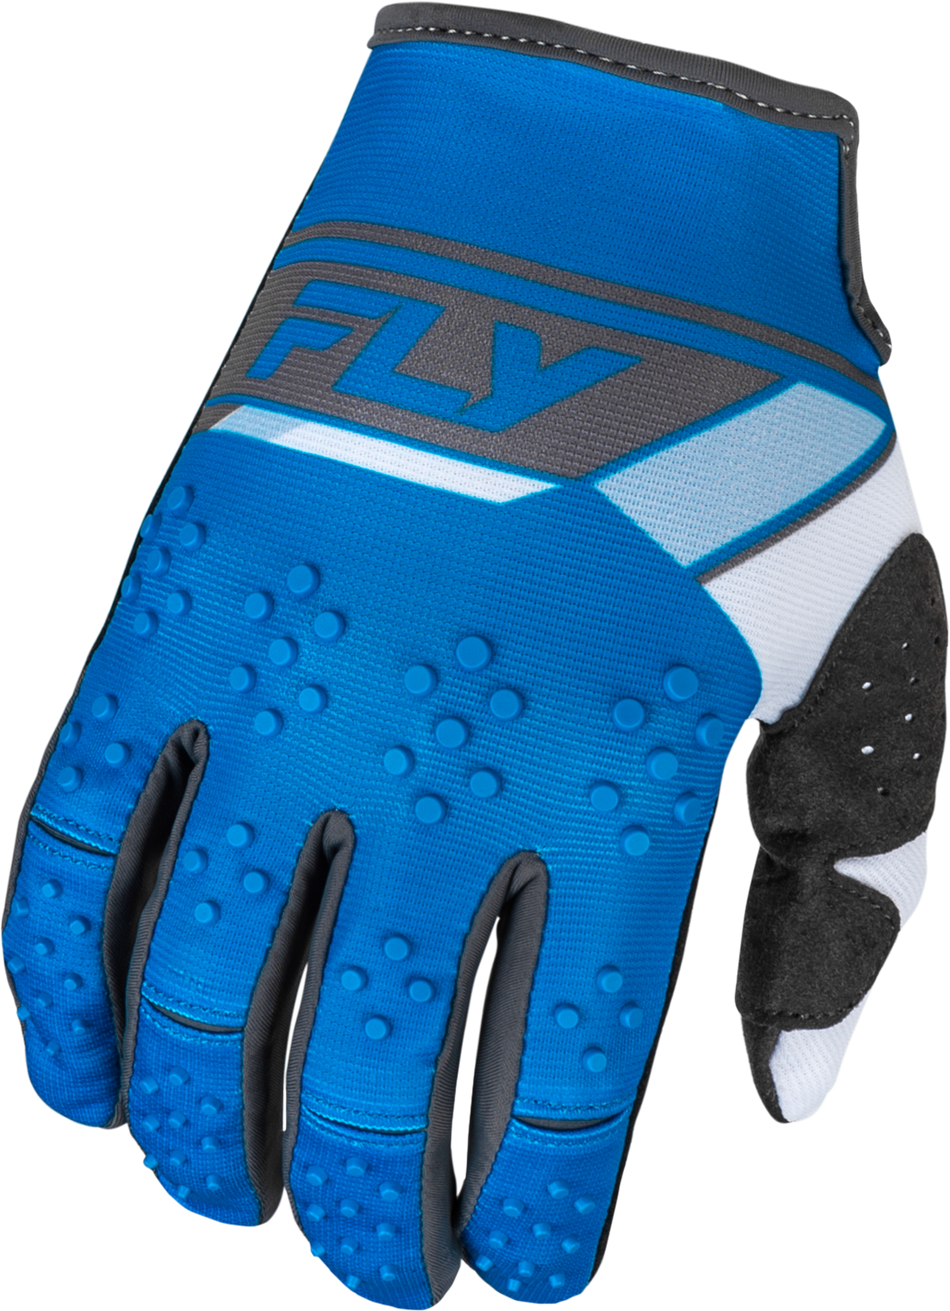 FLY RACING Kinetic Prix Gloves Bright Blue/Charcoal Md 377-410M